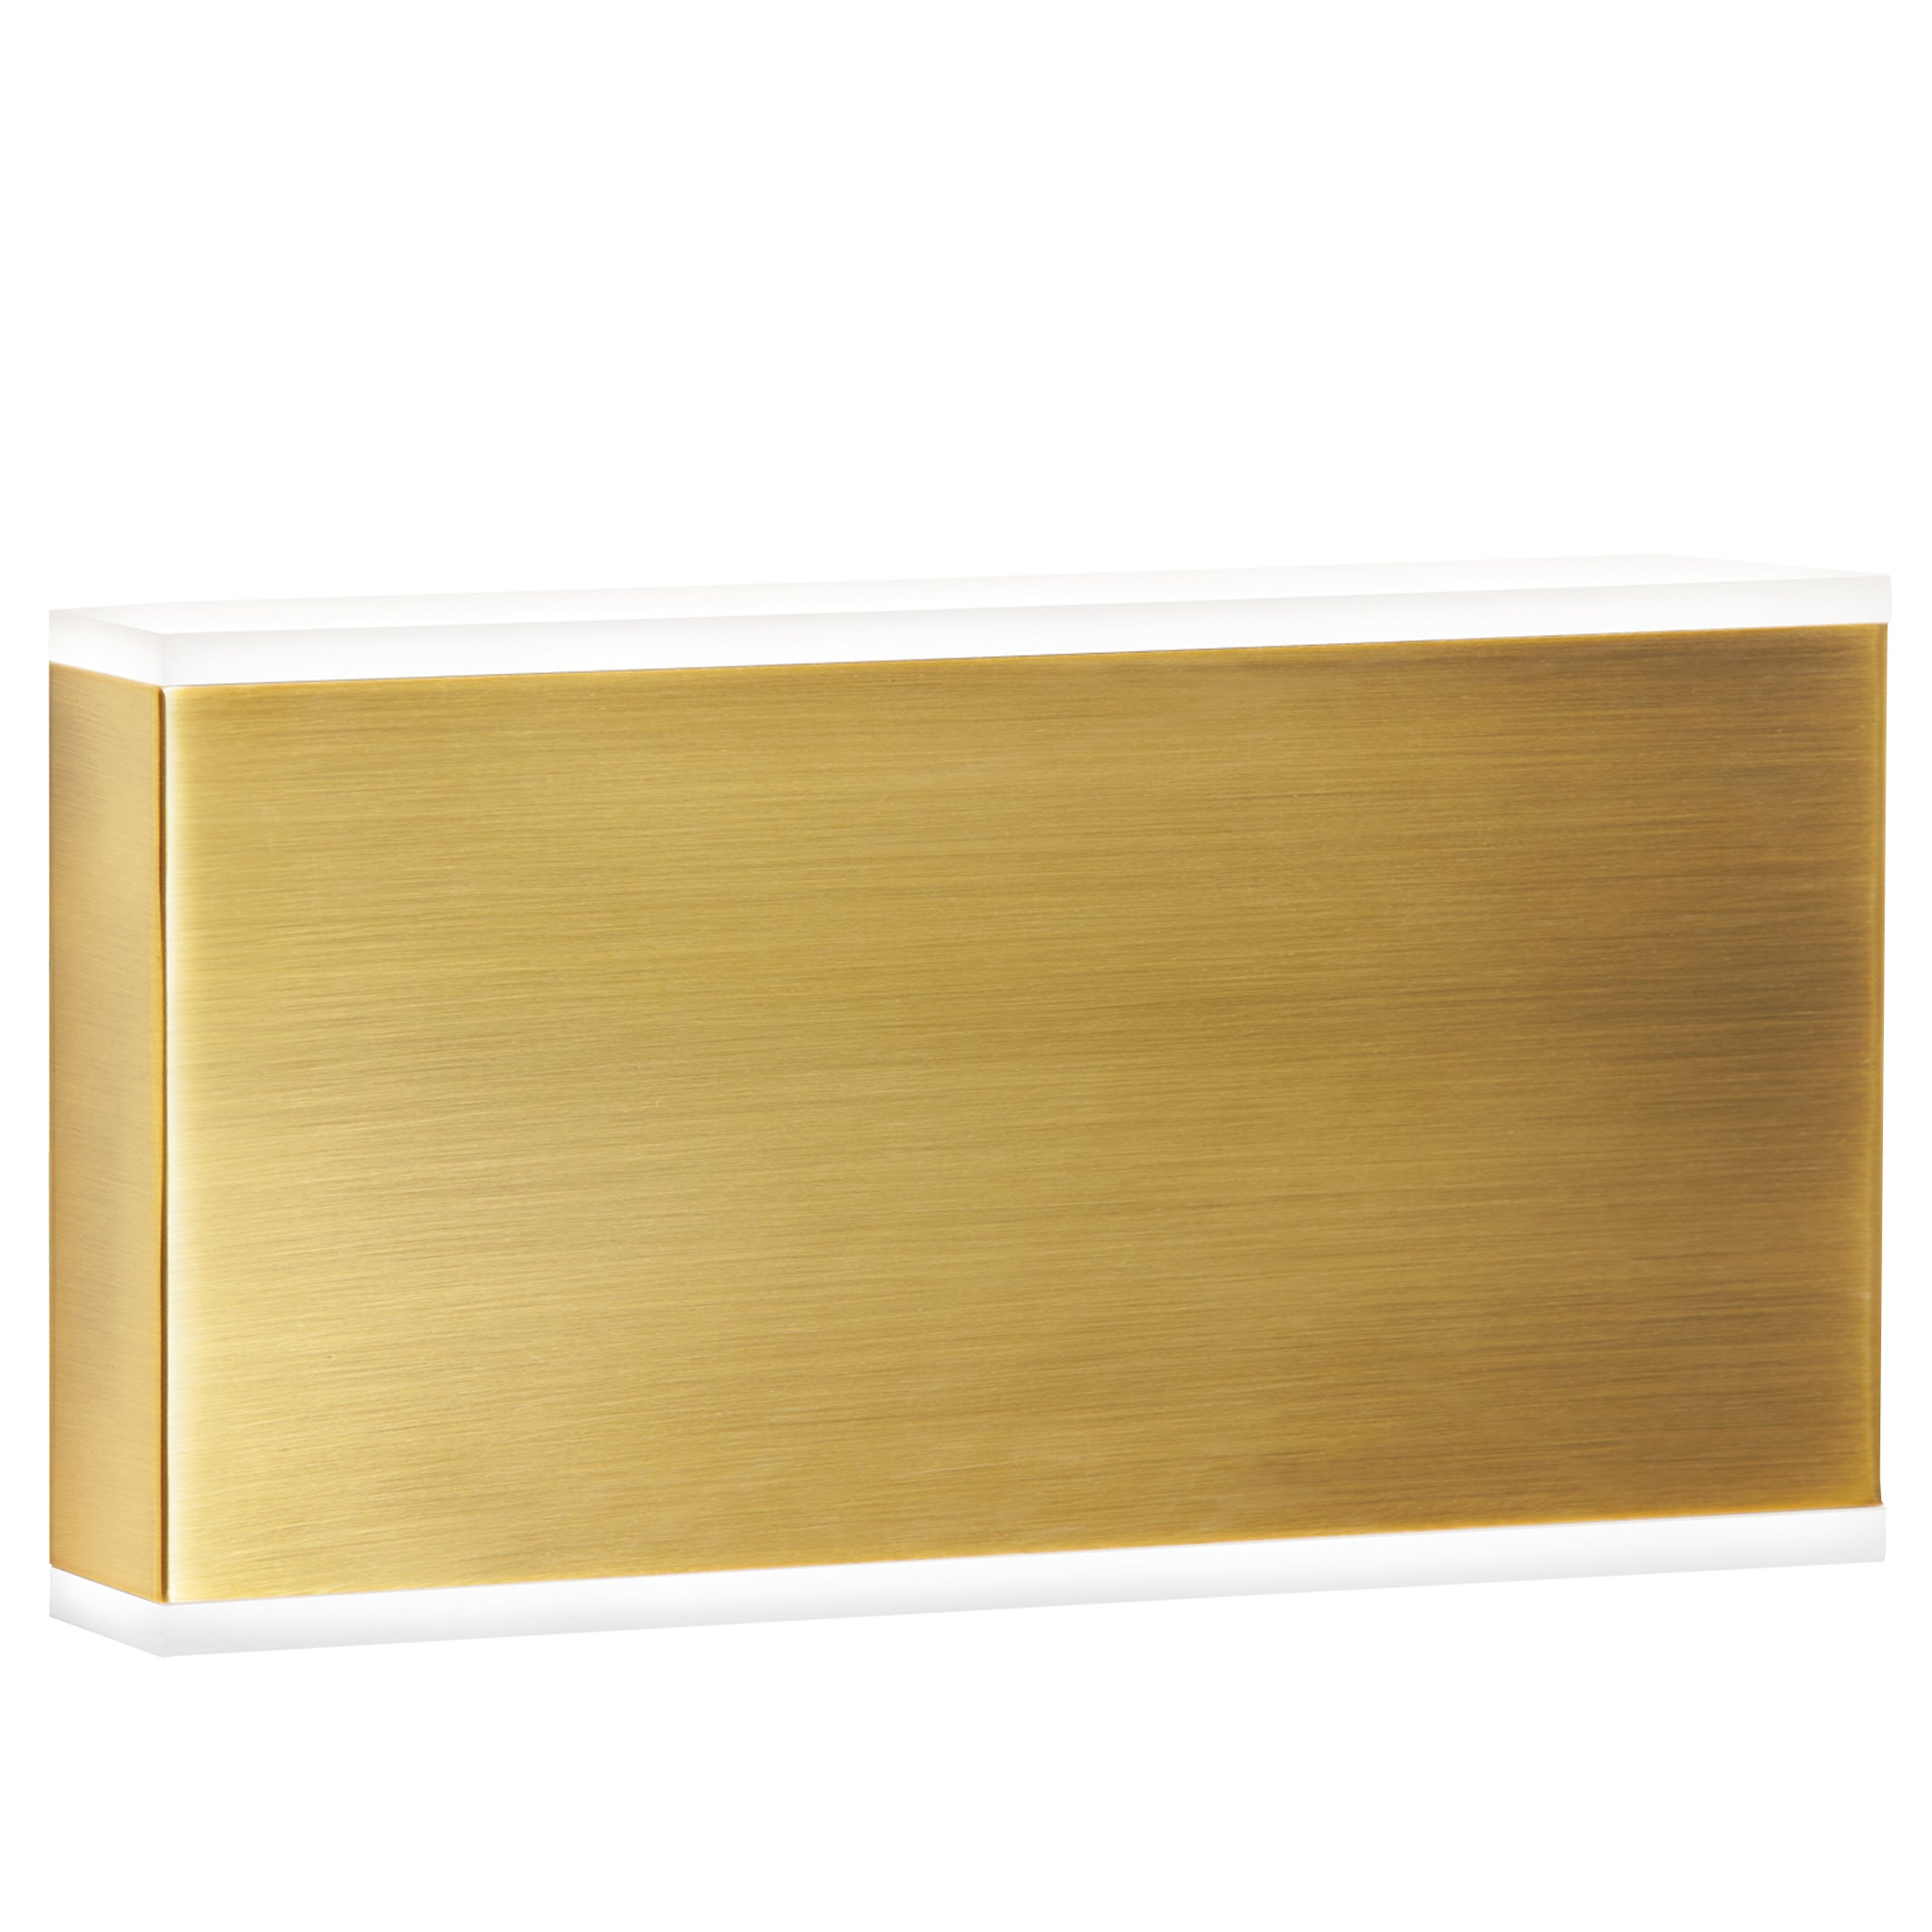 EMERY Wall sconce Gold INTEGRATED LED - EMY-105-20W-AGB | DAINOLITE